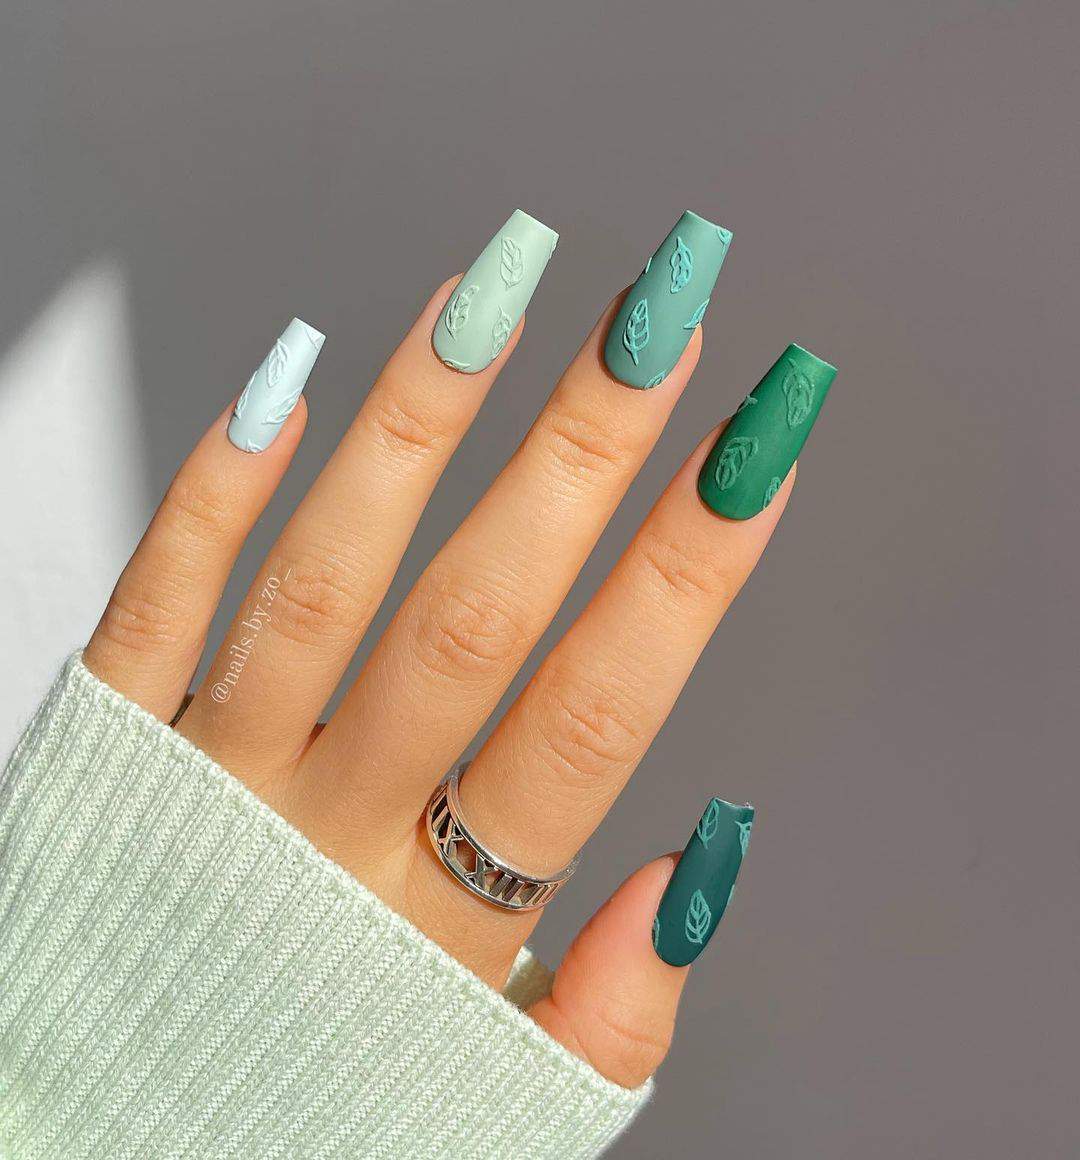 The 100+ Best Nail Designs Trends And Ideas In 2021 images 56